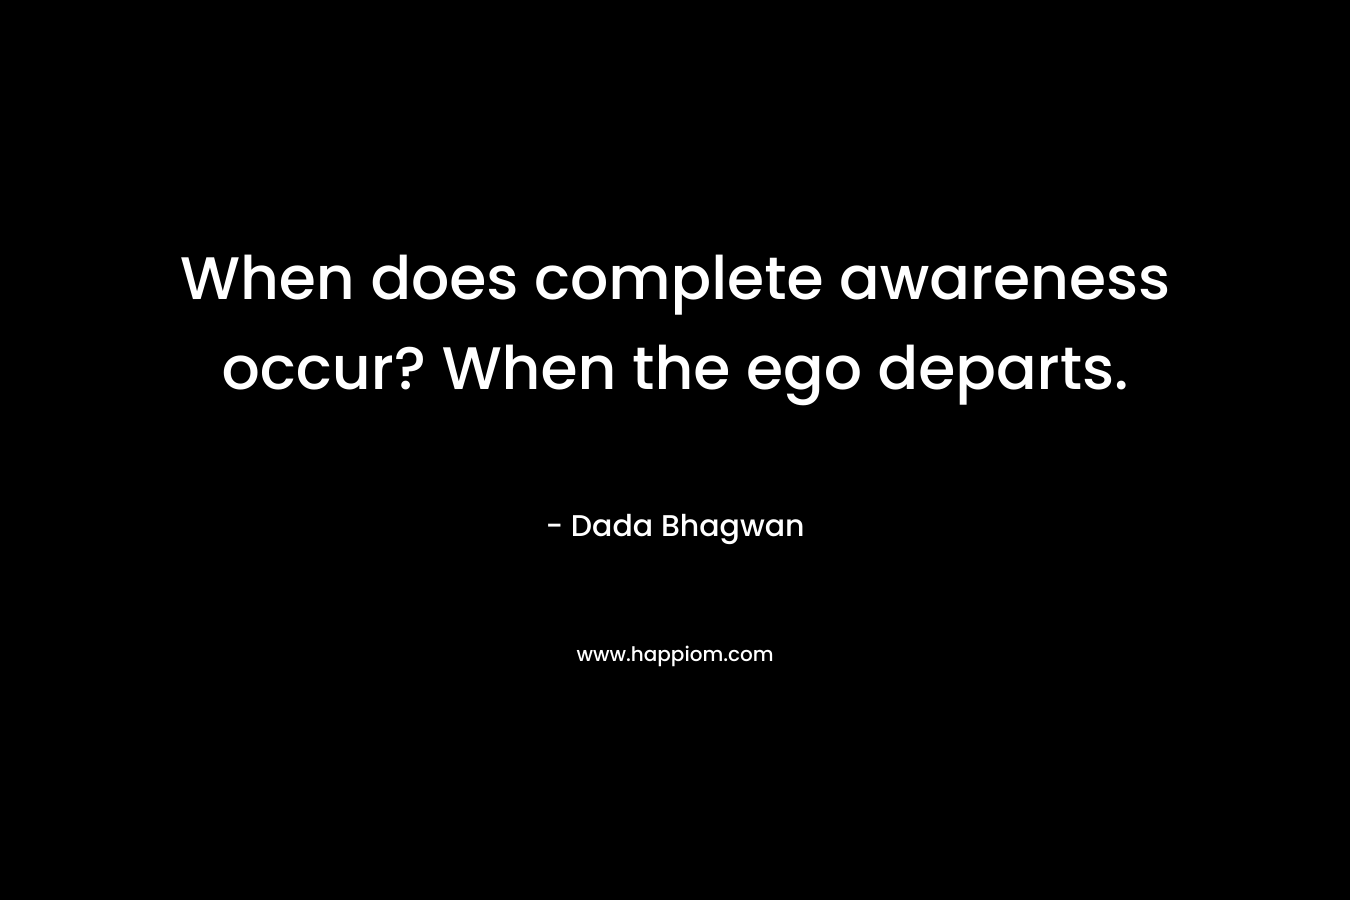 When does complete awareness occur? When the ego departs.